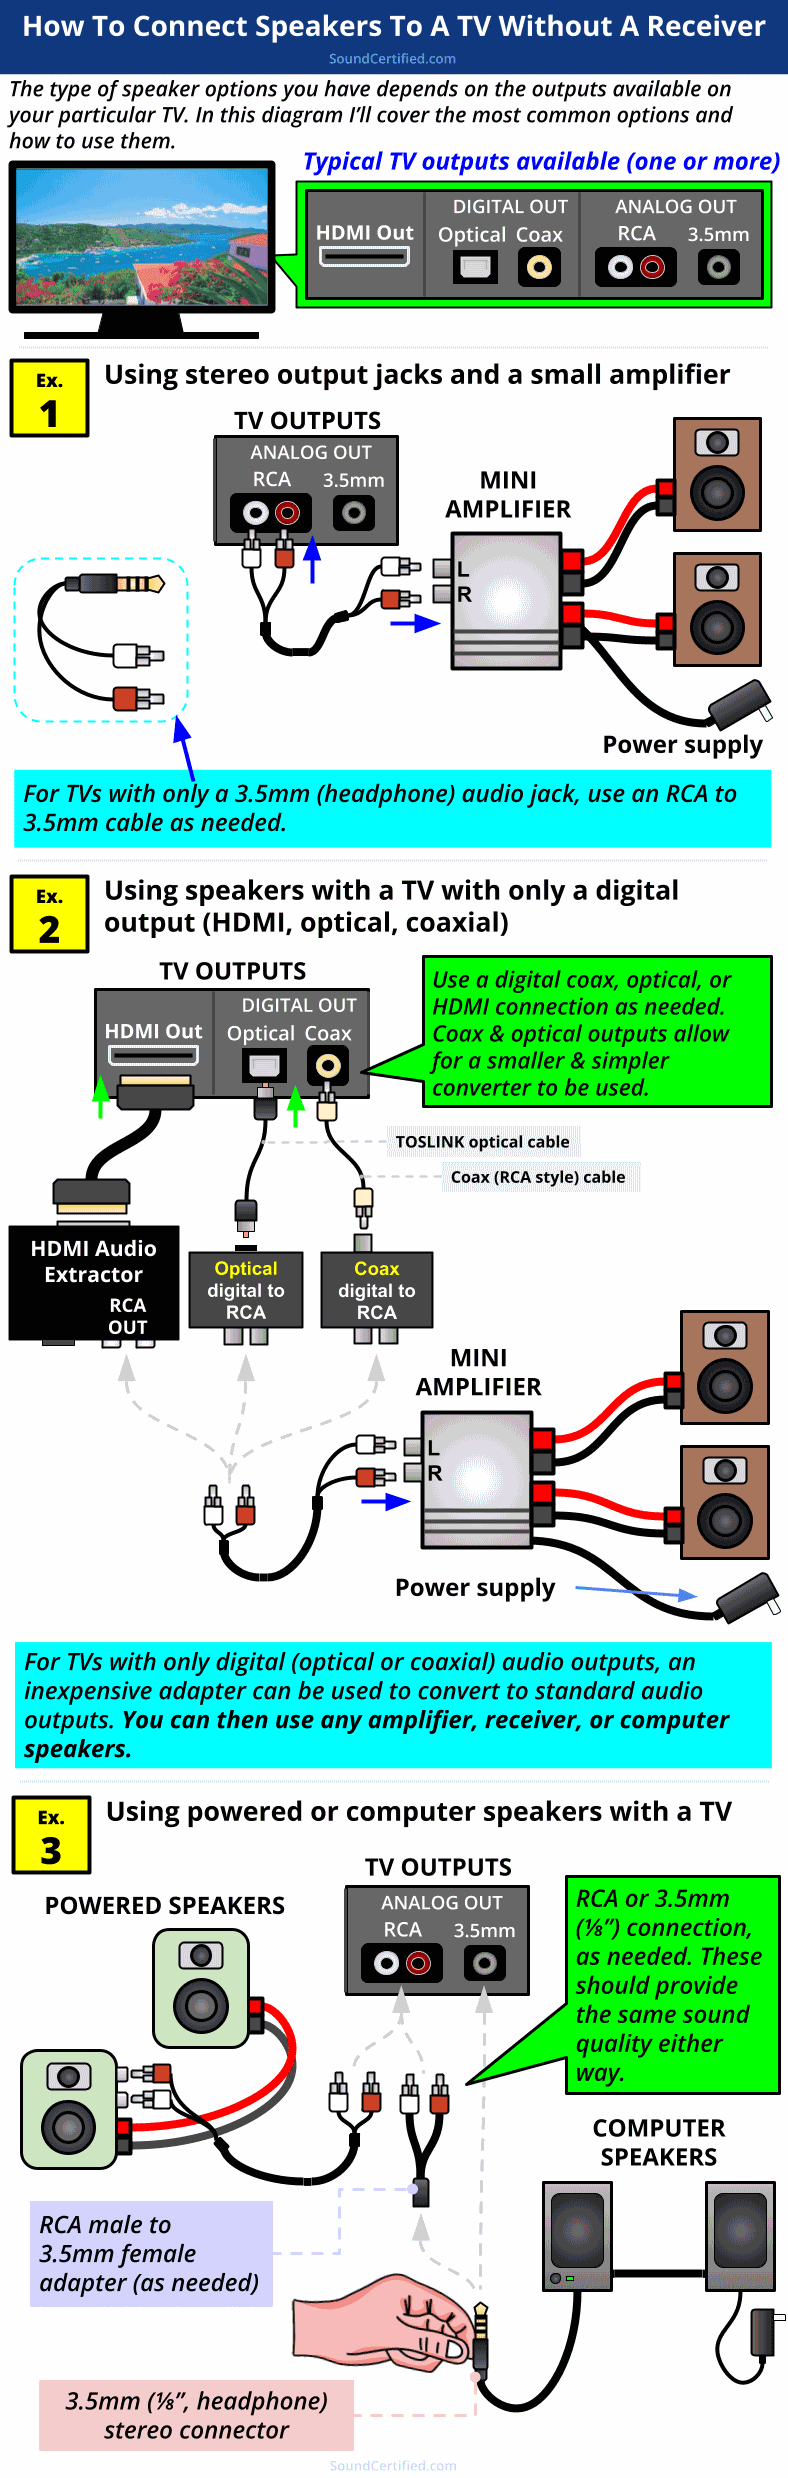 how to connect speakers to TV without receiver diagram